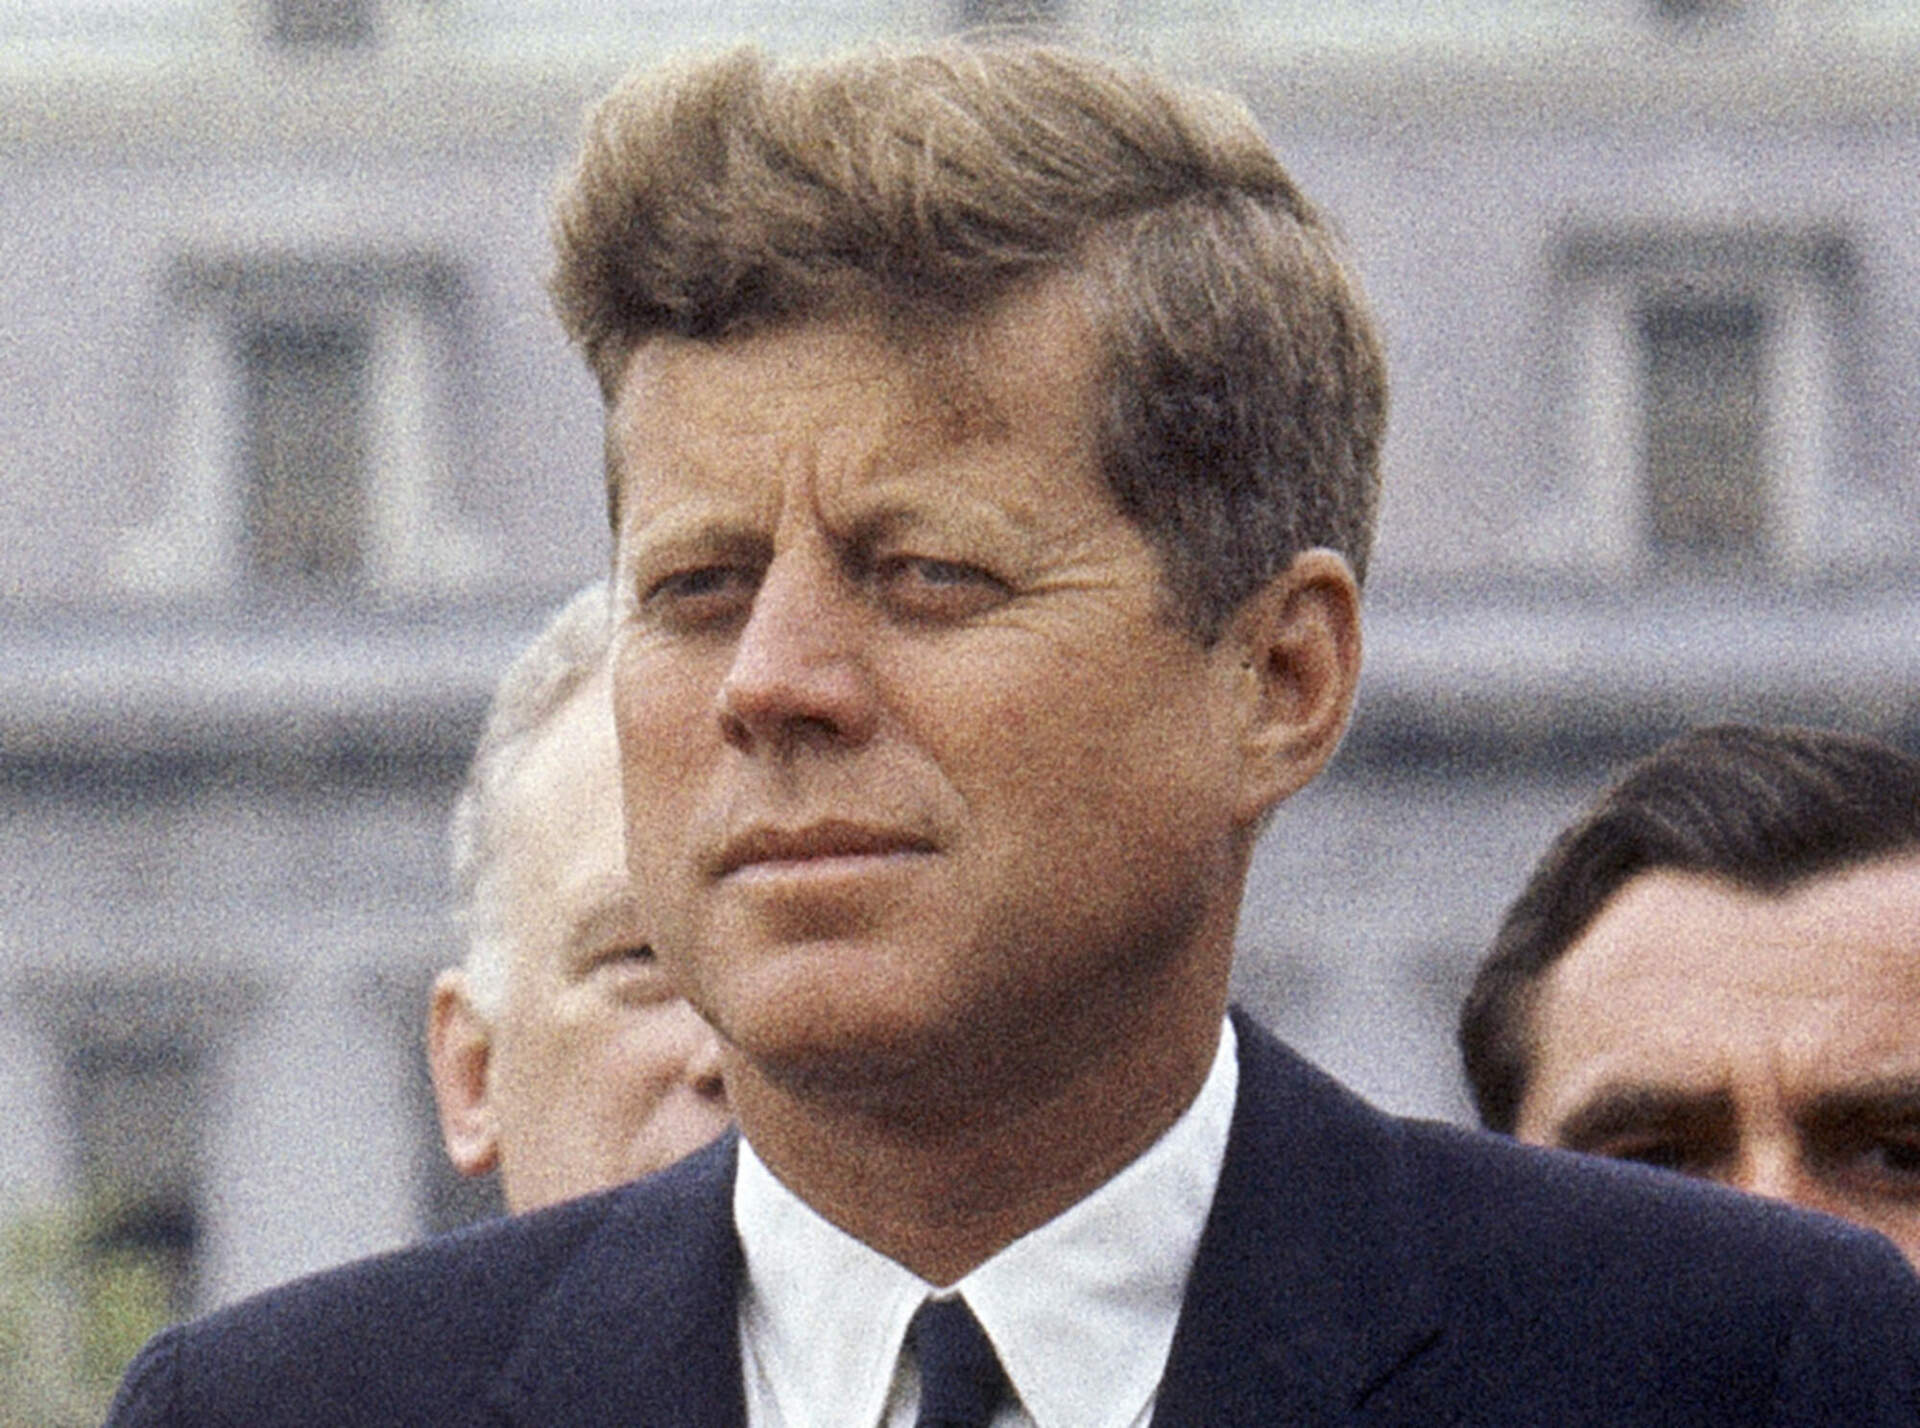 60 years after JFK's death, today's Kennedys choose other paths to public service | WBUR News